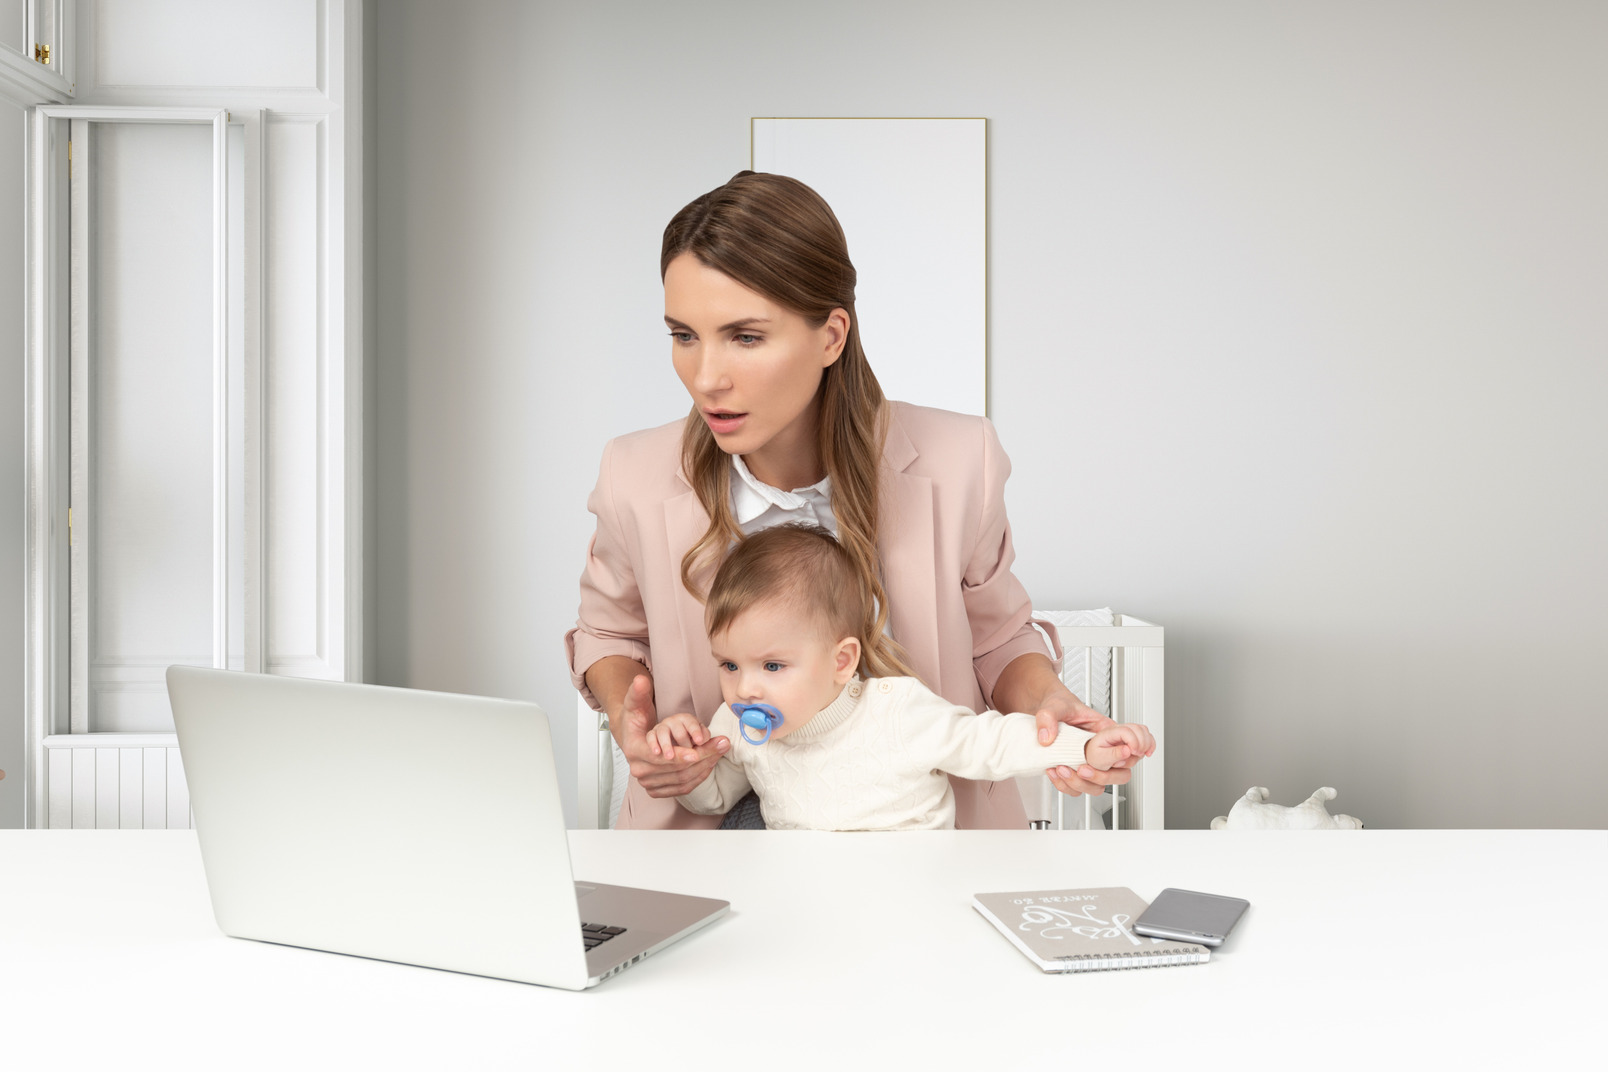 Keep calm, combine working and being a mom